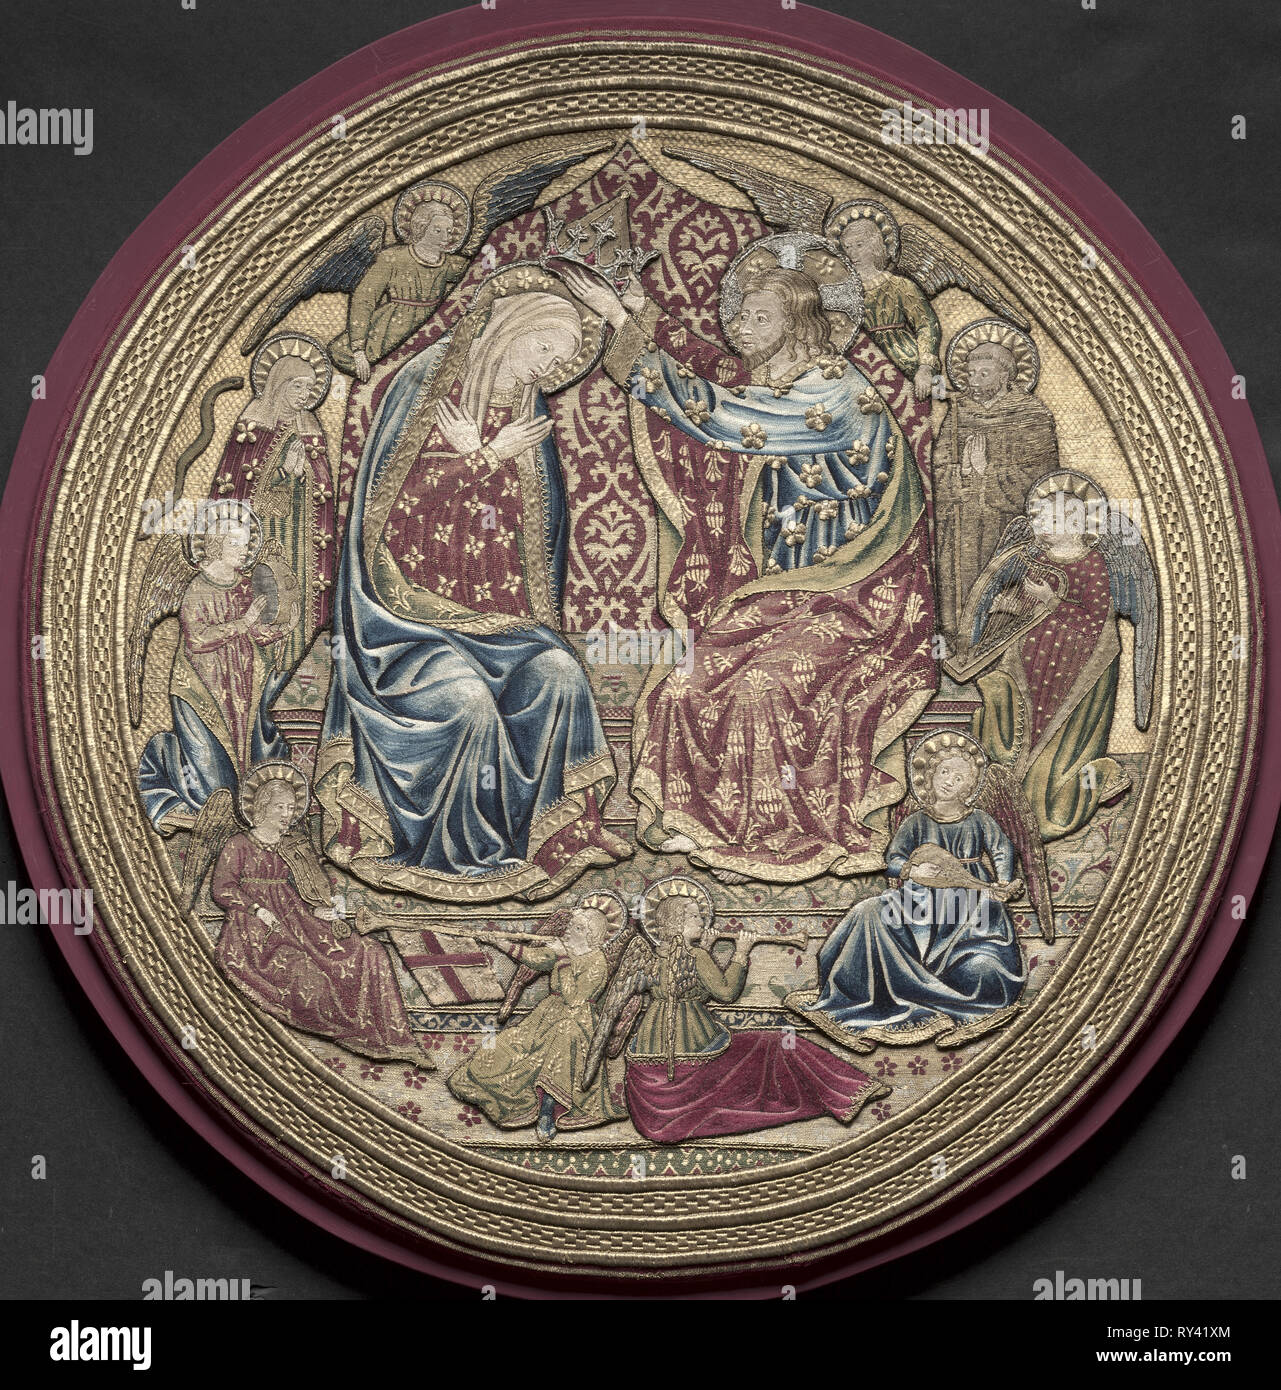 Embroidered Tondo from an Altar Frontal: The Coronation of the Virgin, 1459. Italy, Florence. Embroidery with gold, silver, and silk thread; split, satin, and couching stitches, or nué (shaded Stock Photo